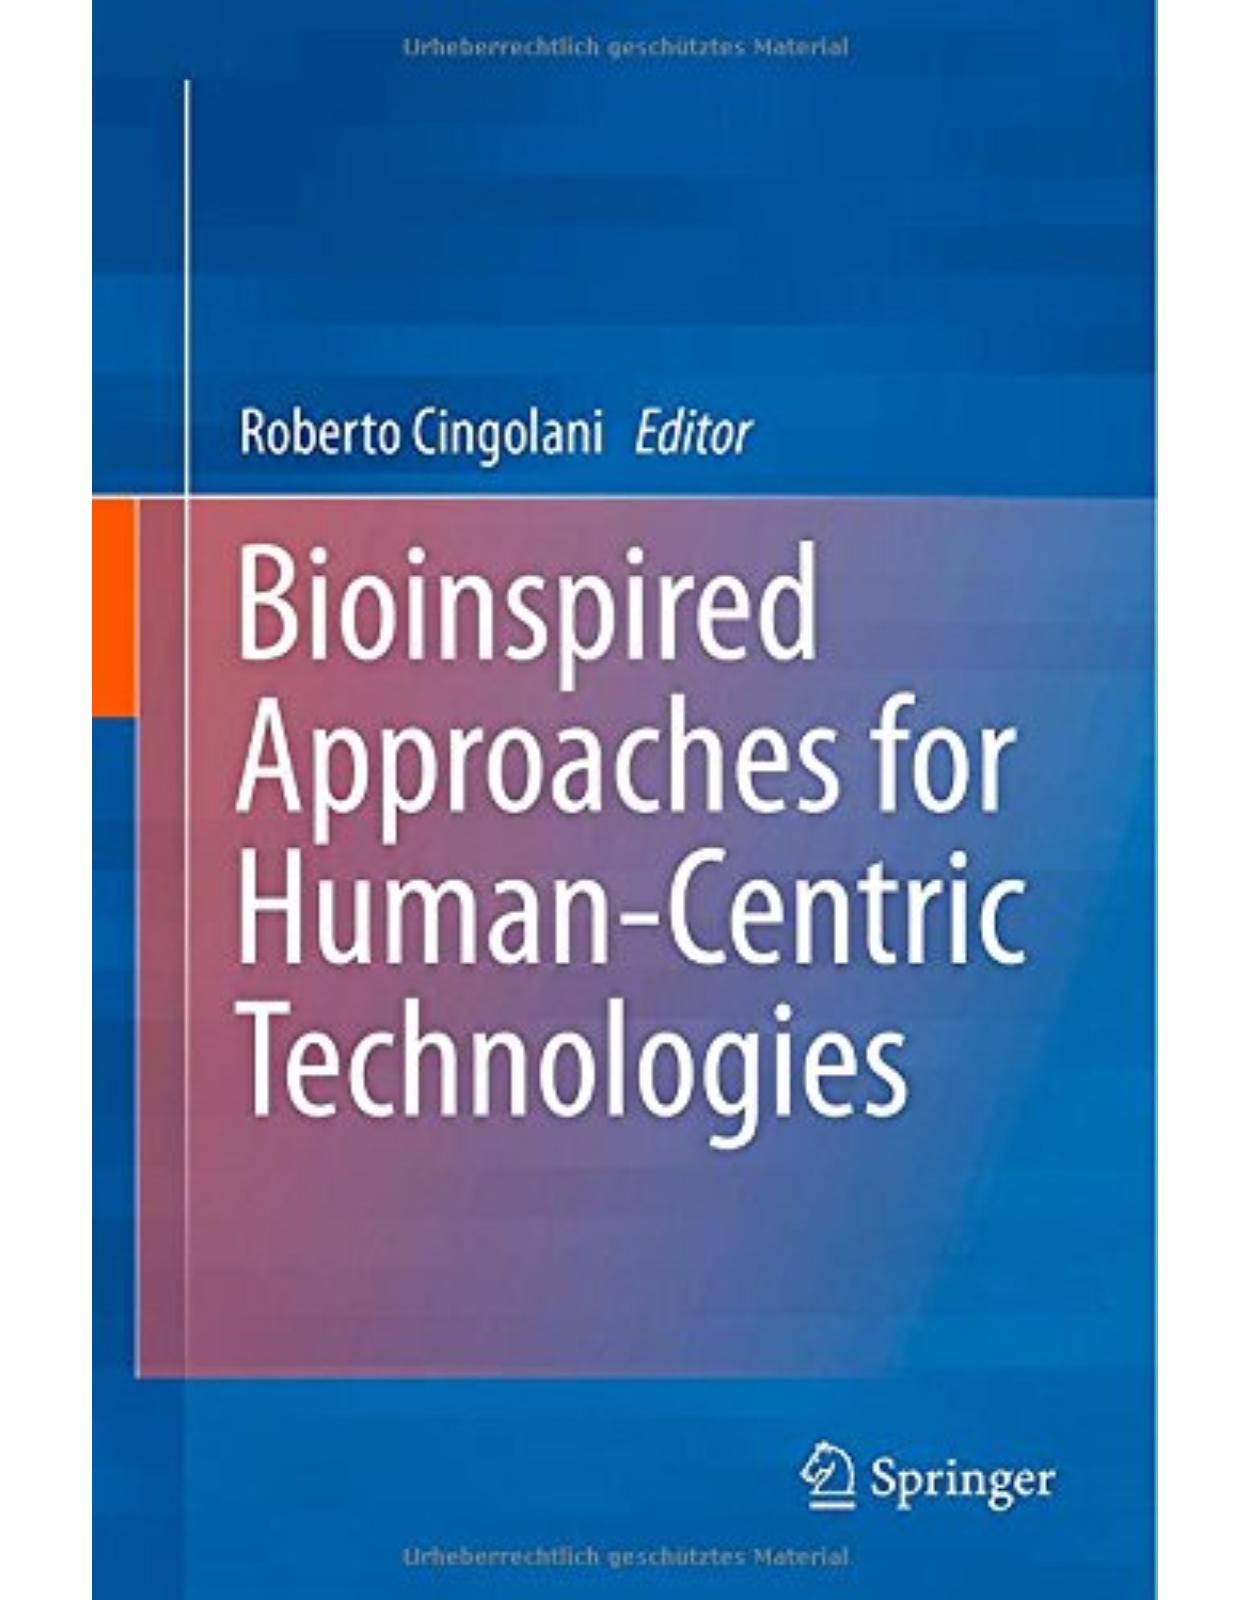 Bioinspired Approaches for HumanCentric Technologies